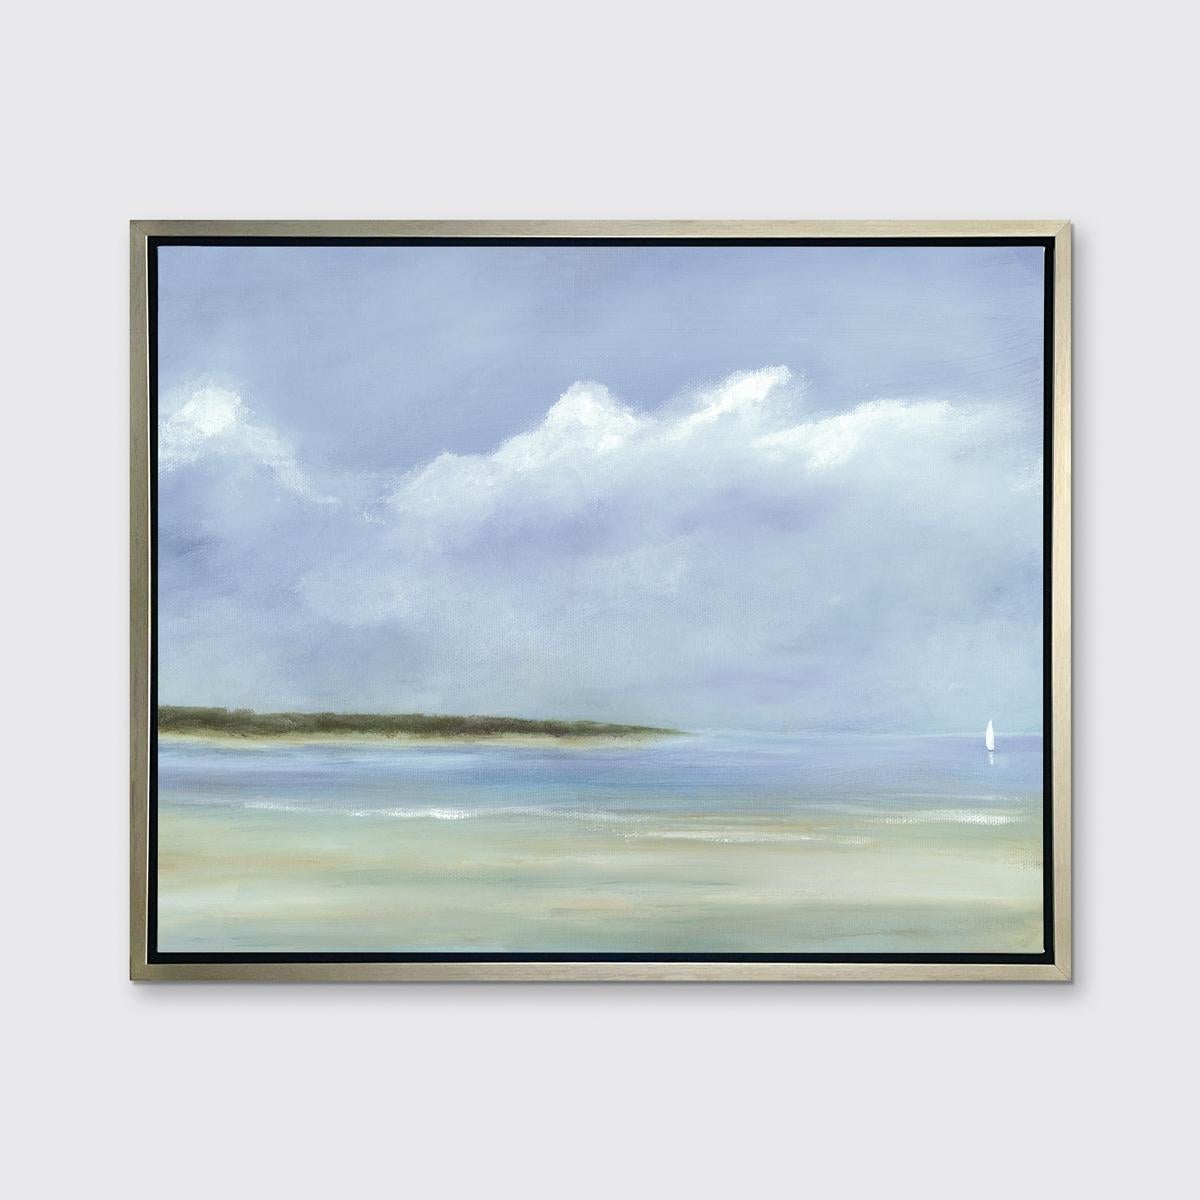 This limited edition seascape print by S.C. Aldo captures a coastal scene overlooking water from a sandy shore, with green trees lining part of the horizon and a sailboat sailing in the distance. Aldo's signature style borders on Impressionistic,